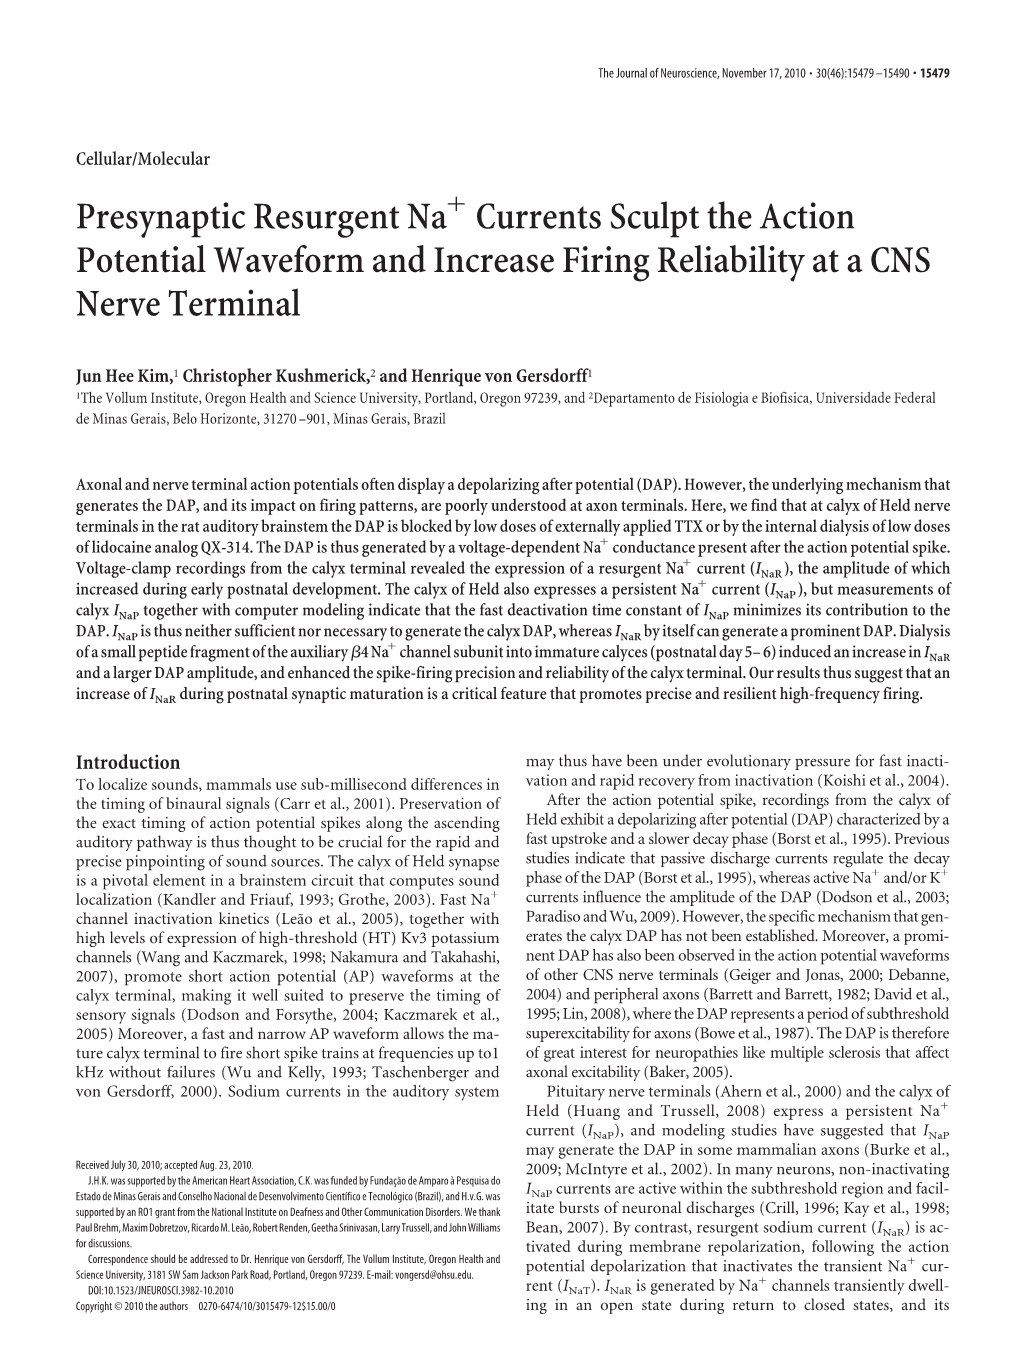 Presynaptic Resurgent Na Currents Sculpt the Action Potential Waveform and Increase Firing Reliability at a CNS Nerve Terminal